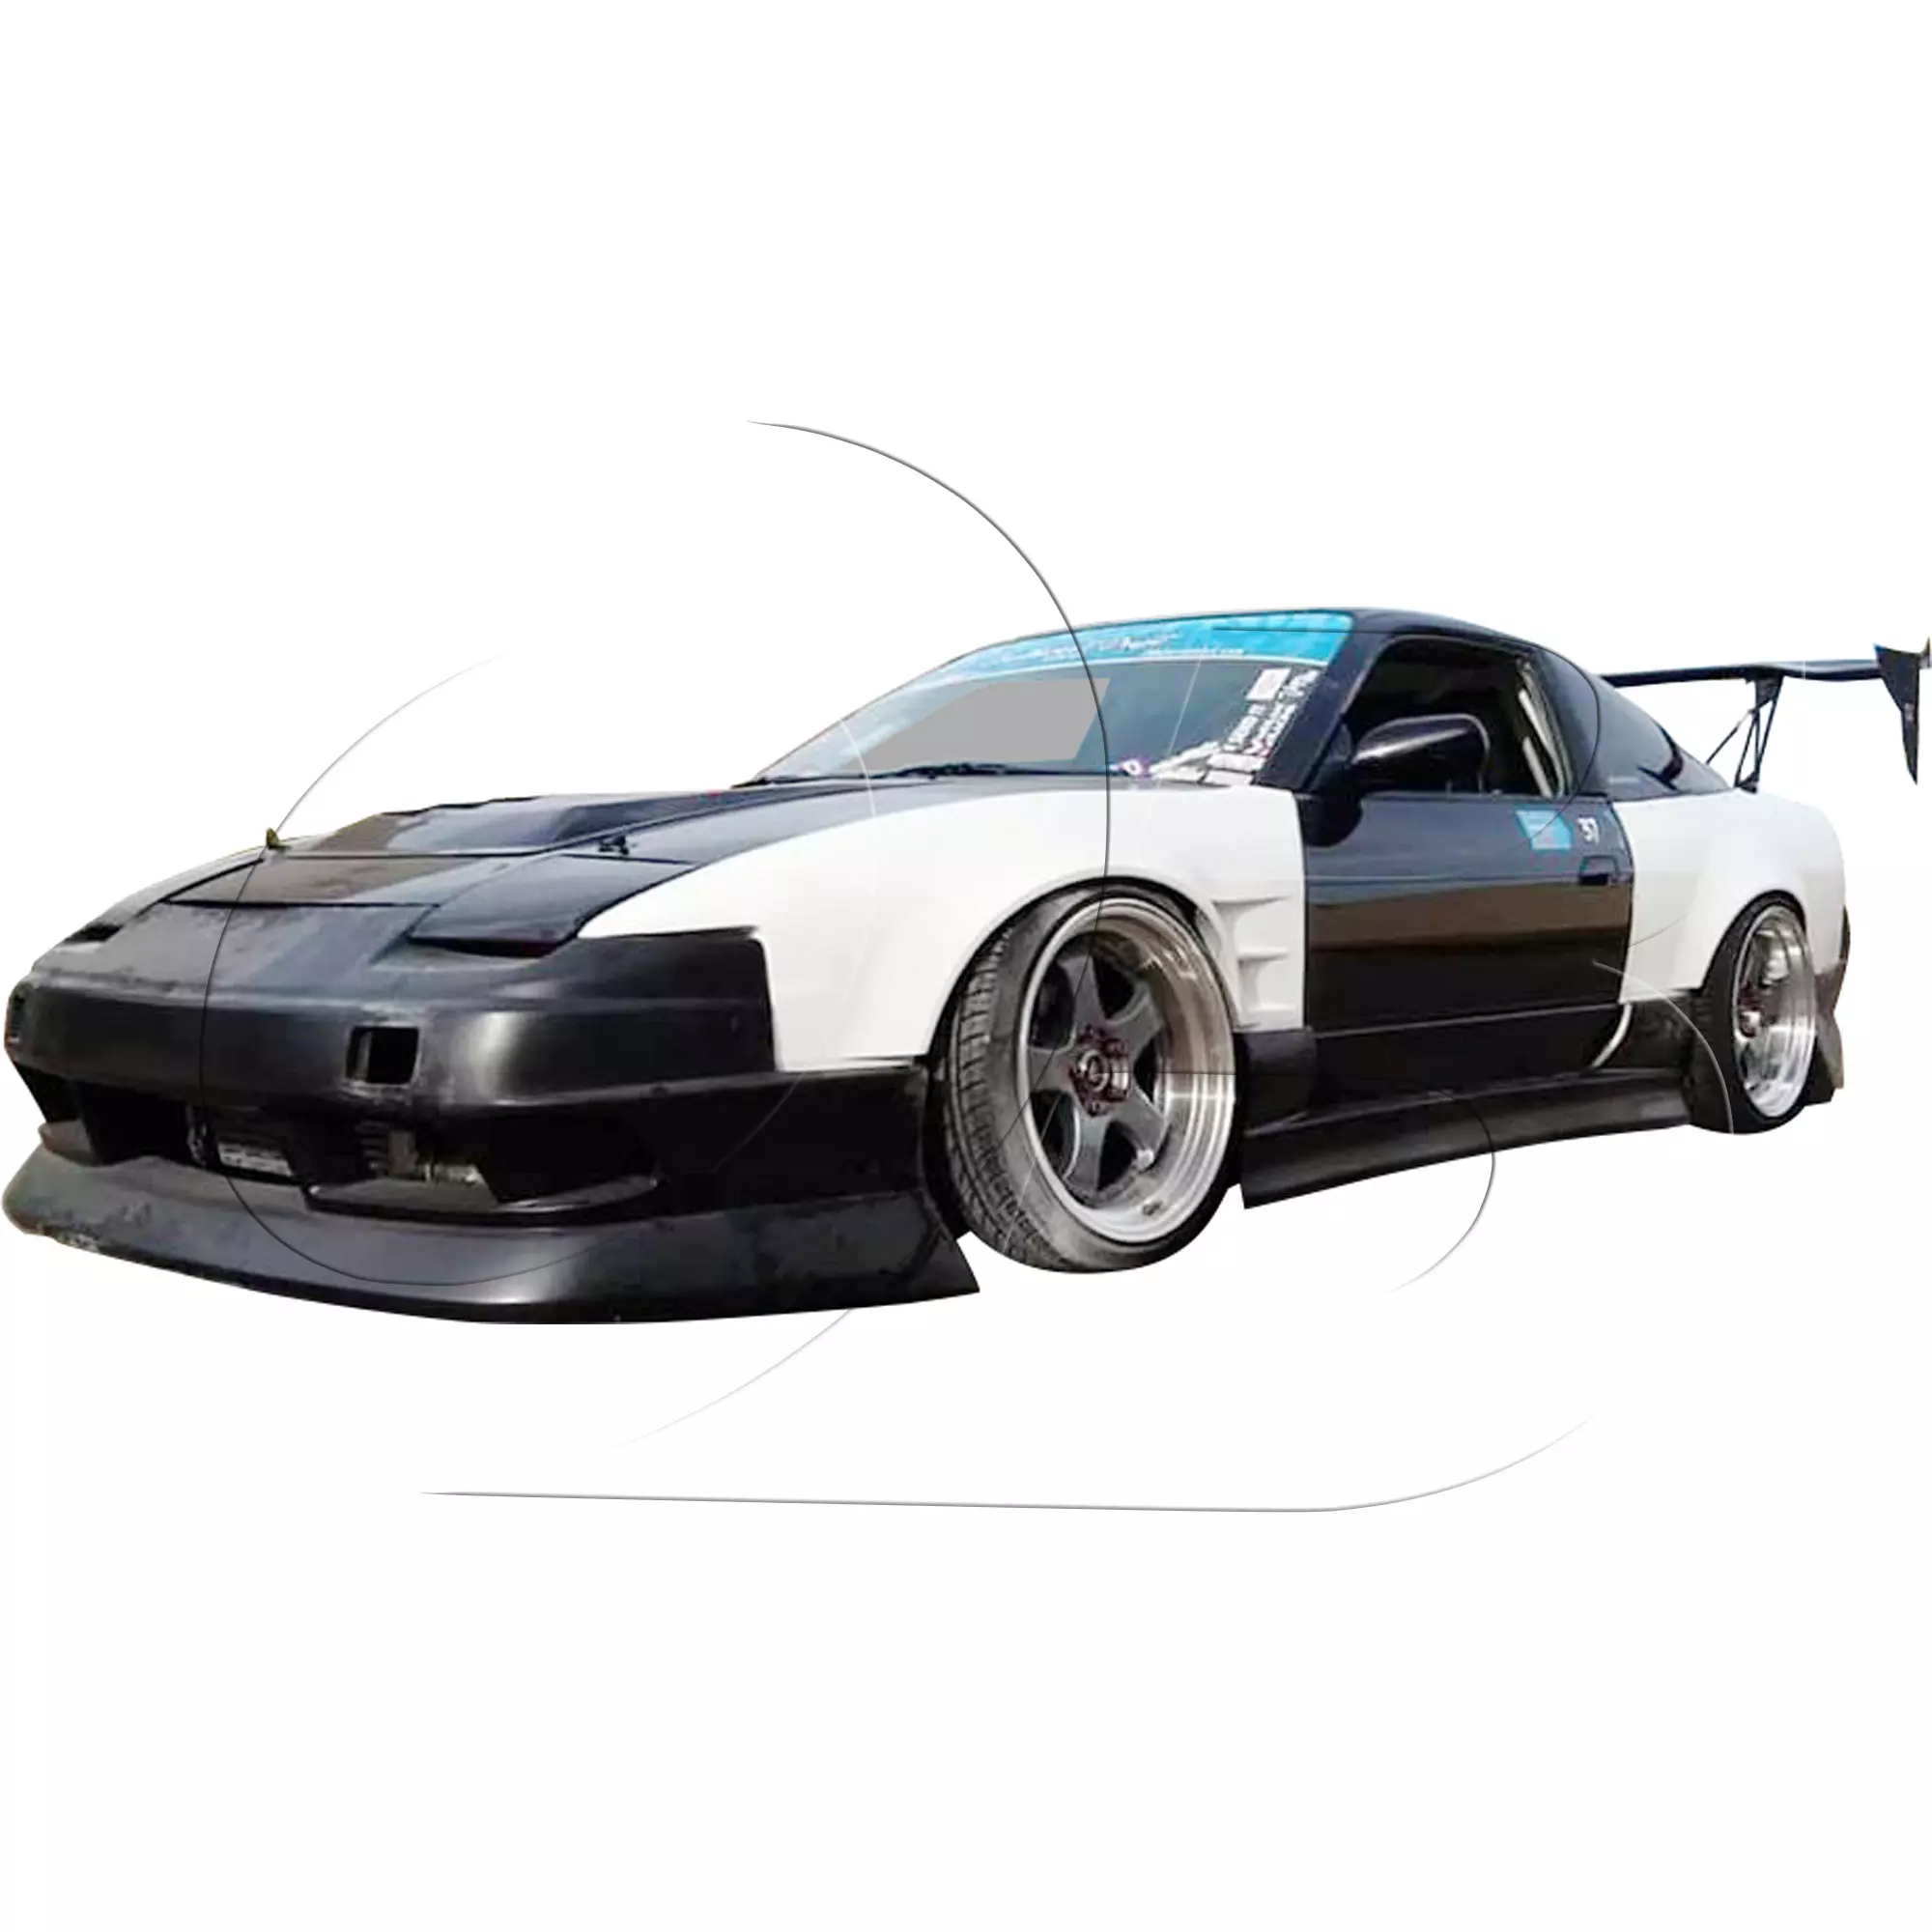 KBD Urethane Bsport2 Style 4pc Full Body Kit > Nissan 240SX 1989-1994 > 2dr Coupe - Image 14